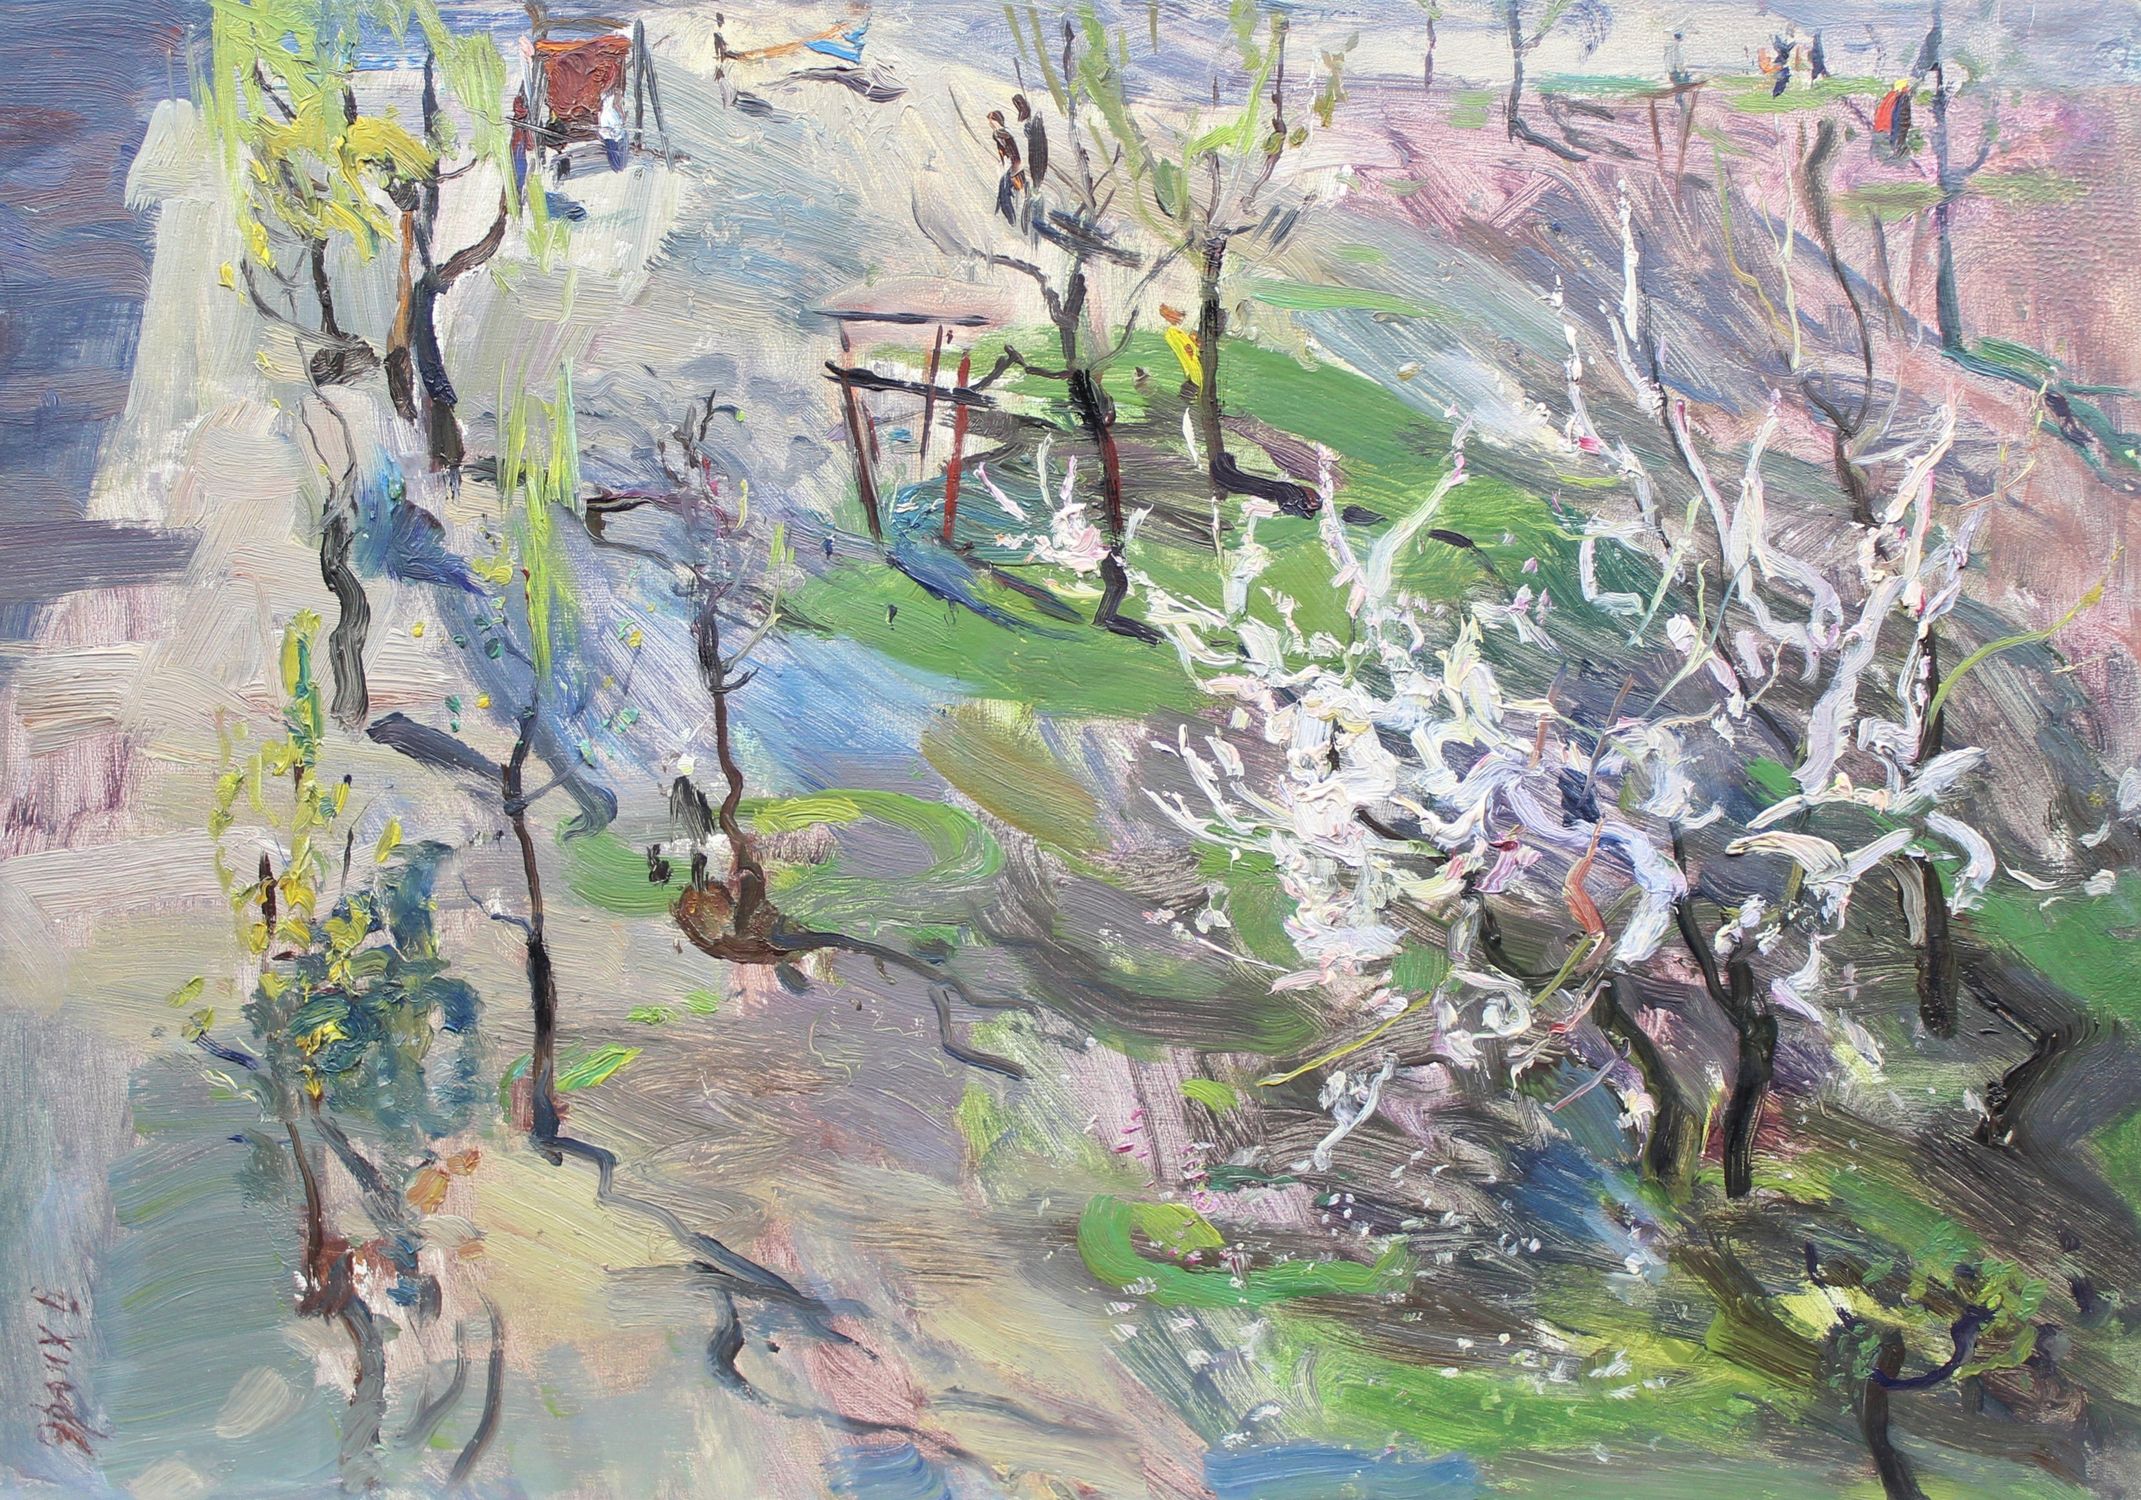 "Spring in the yard"